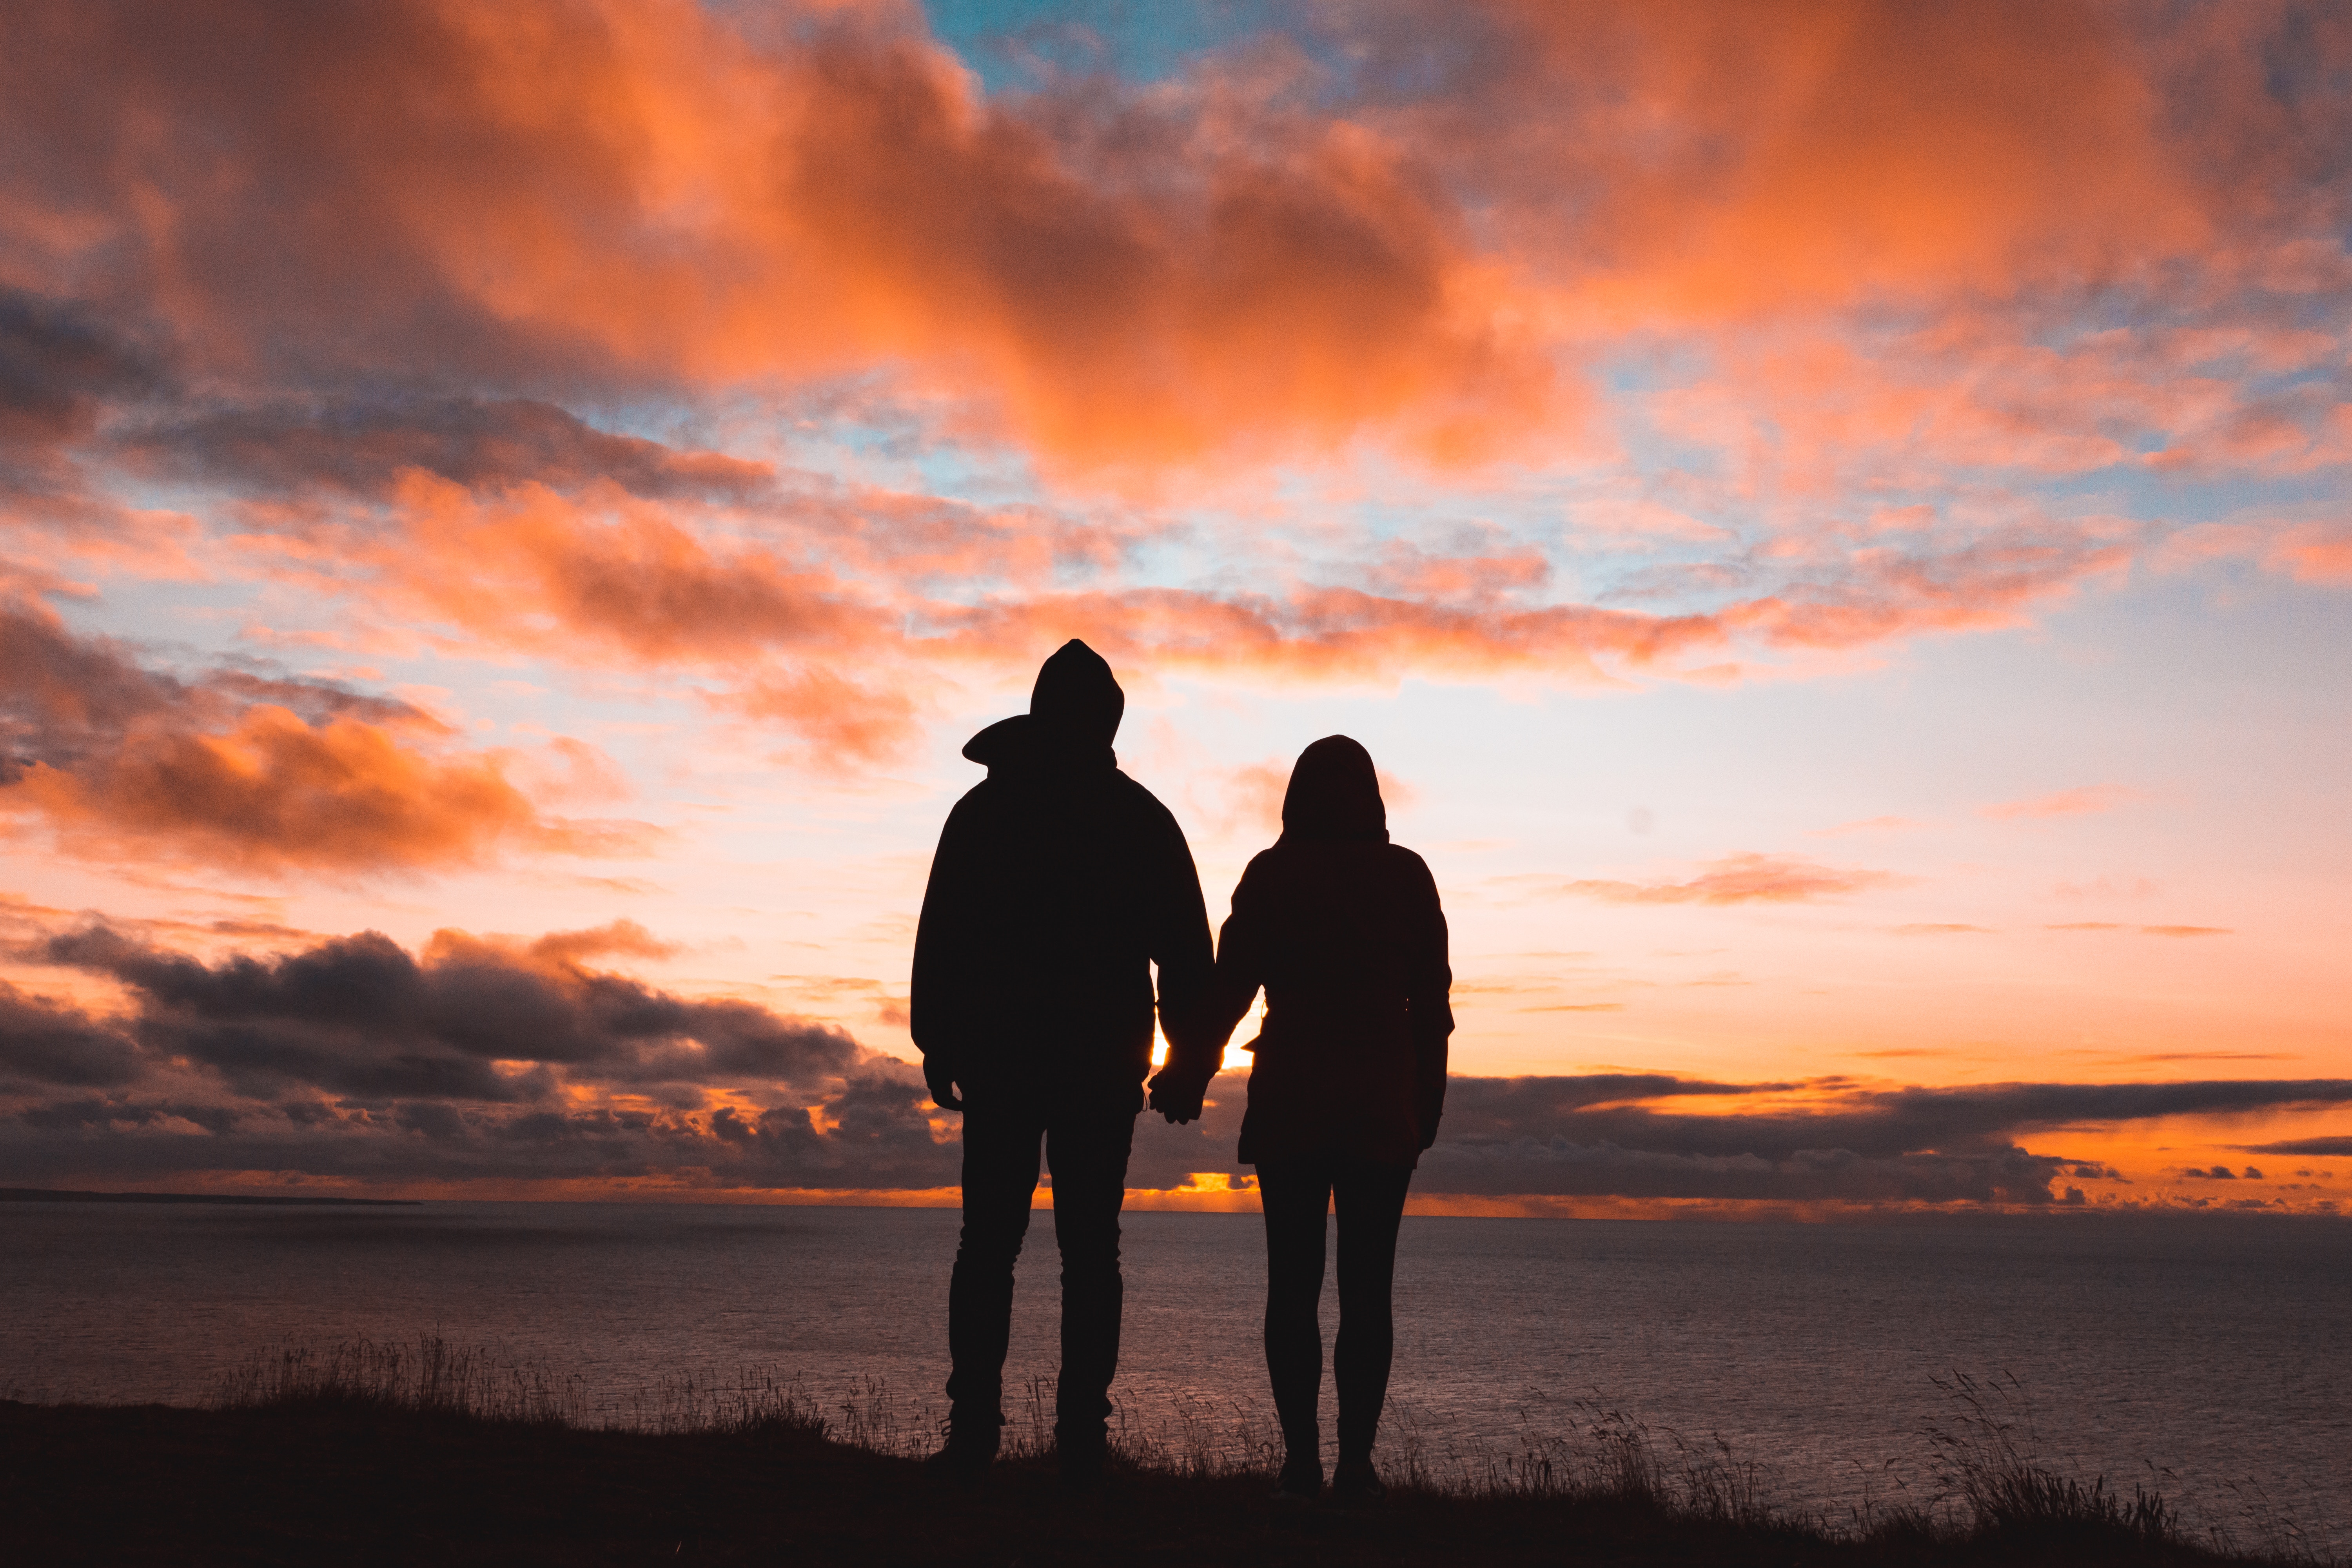 144023 download wallpaper couple, sunset, sky, love, pair, silhouettes screensavers and pictures for free